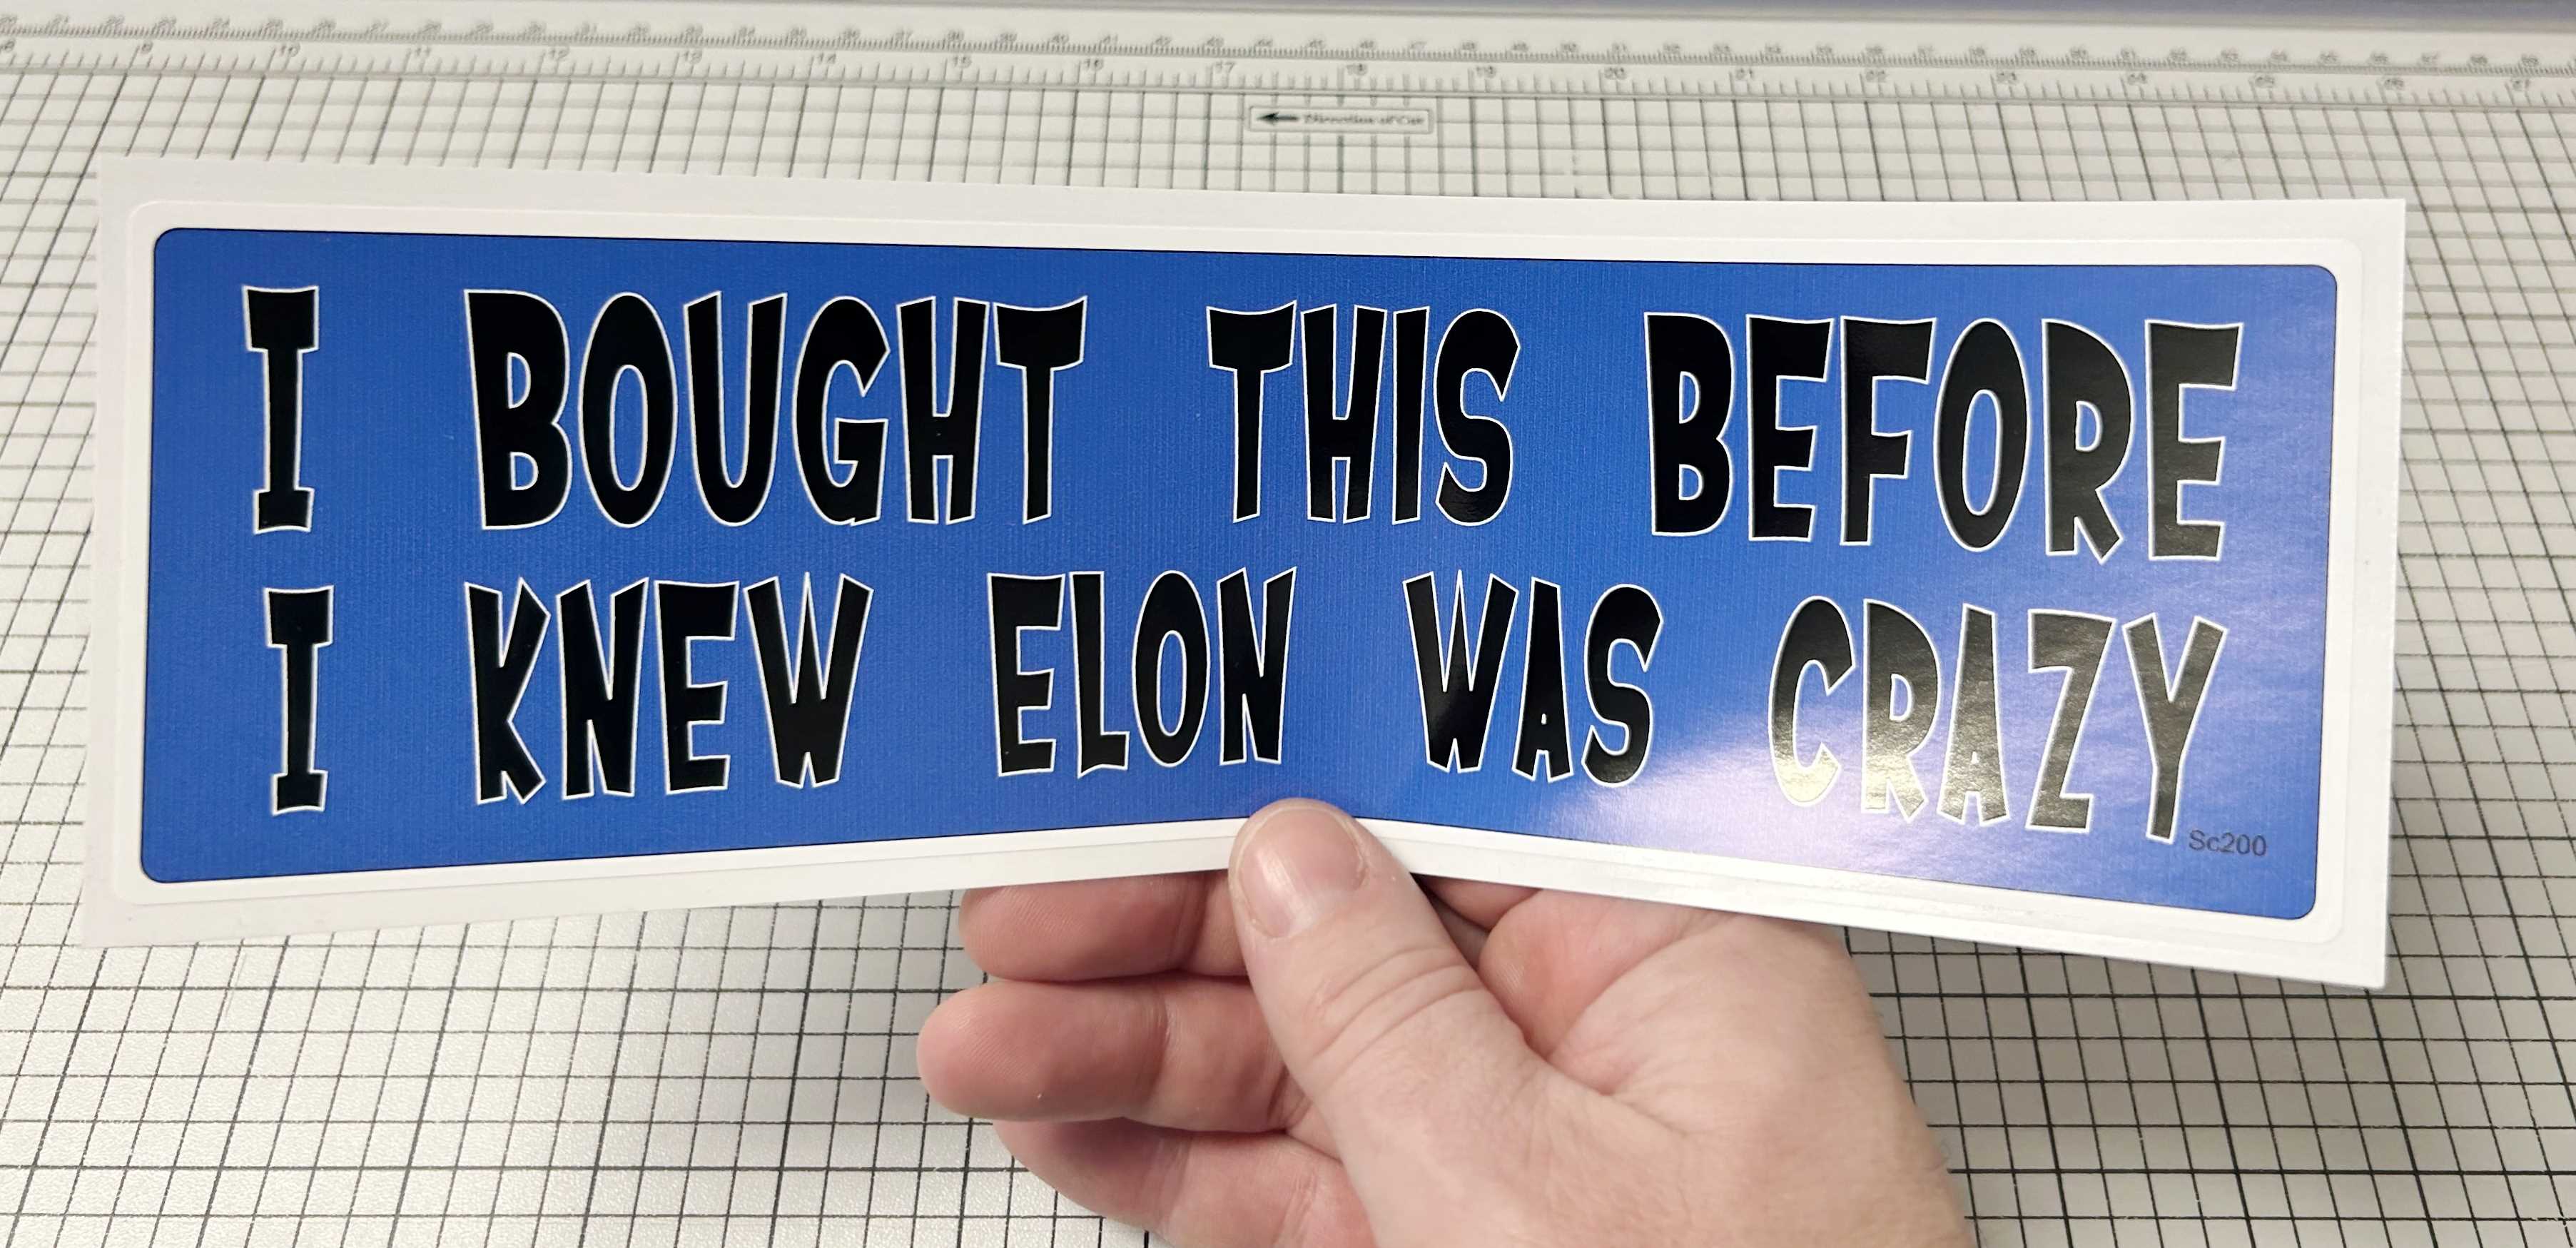 I BOUGHT THIS BEFORE I KNEW ELON WAS CRAZY BUMPER STICKER IN HAND